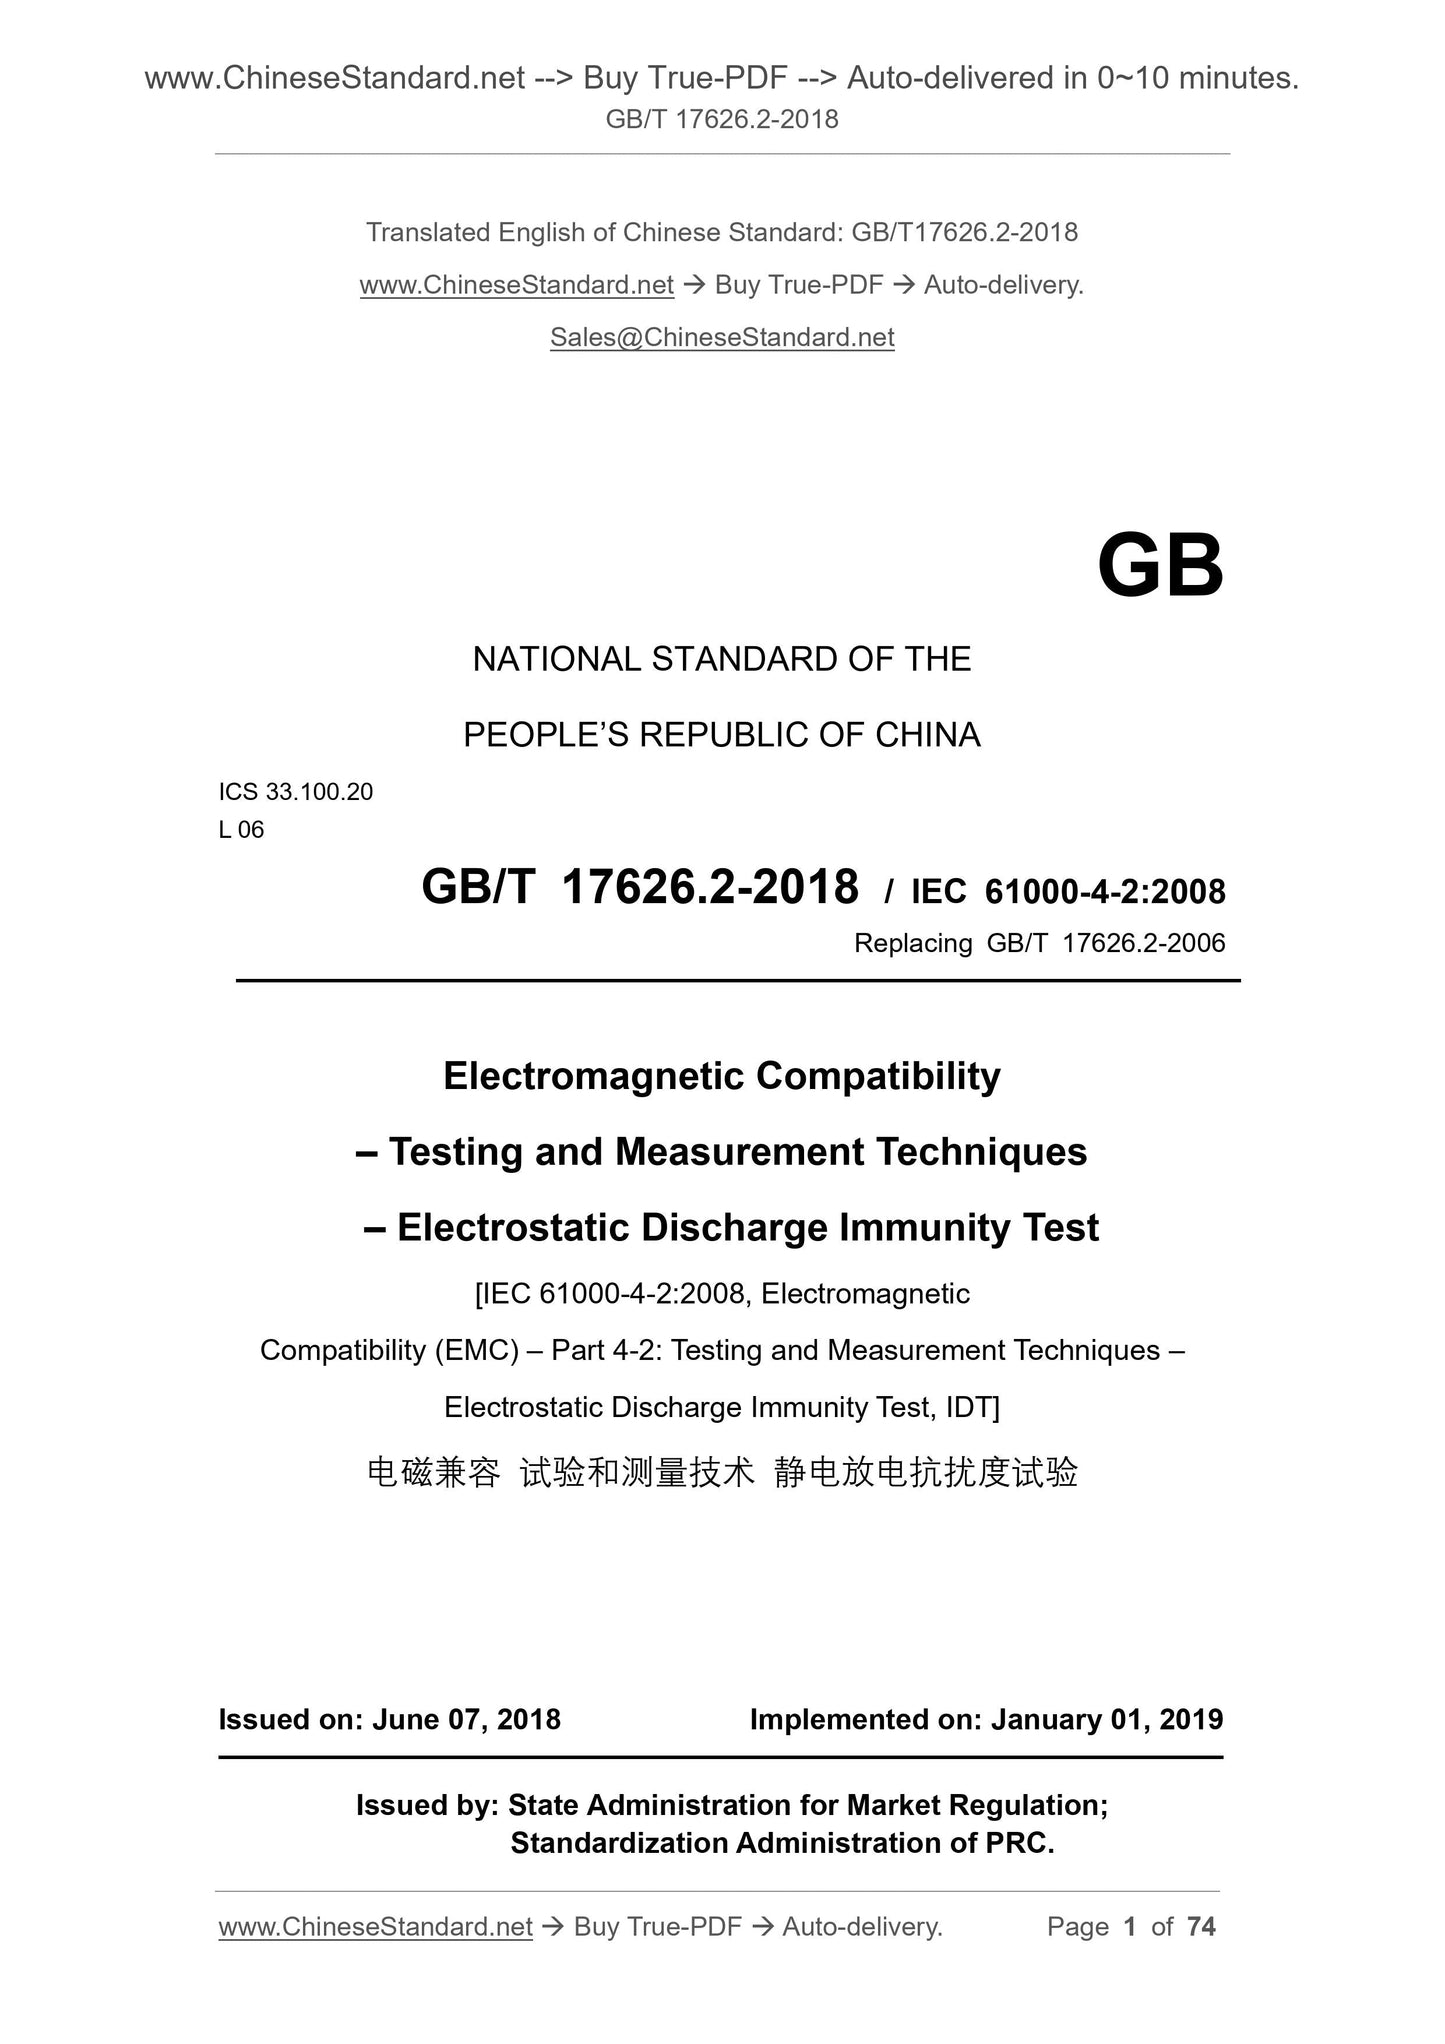 GB/T 17626.2-2018 Page 1